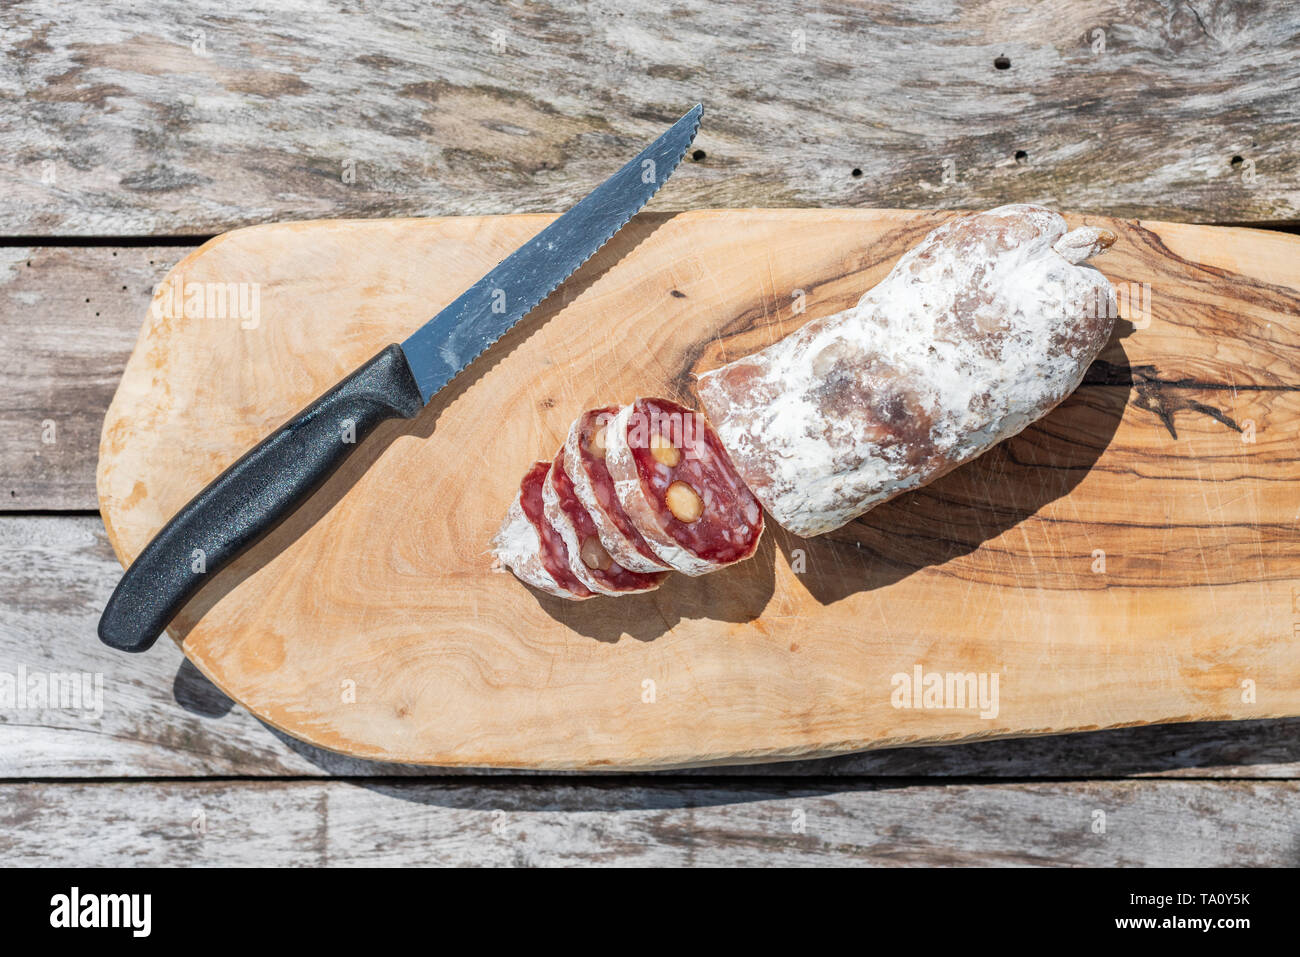 Dried sausage with nuts cut in slices and a knife close-up view on a wooden table Stock Photo